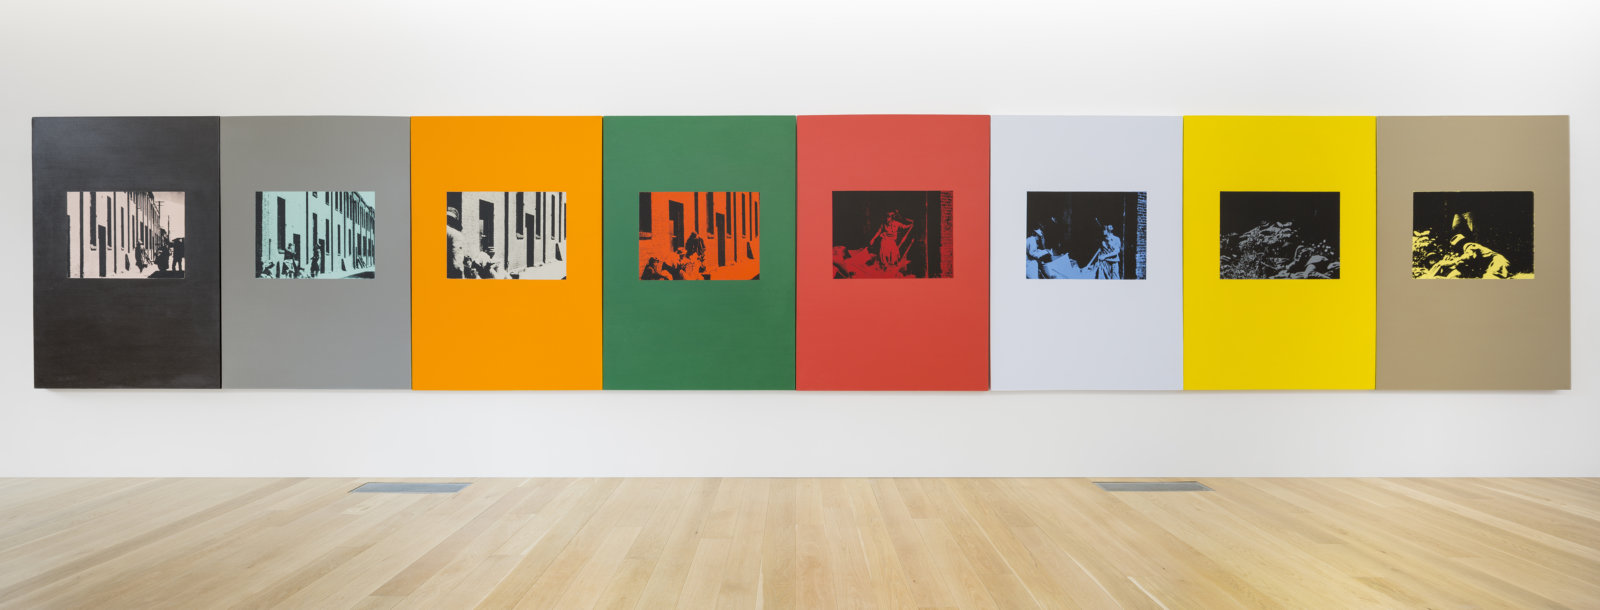 Ian Wallace, Poverty 1982, 1982, oil-based silkscreen over acrylic paint on canvas, 8 panels, 71 x 376 in. (180 x 955 cm). Installation view, Collected Works, The Rennie Museum, Vancouver, 2017